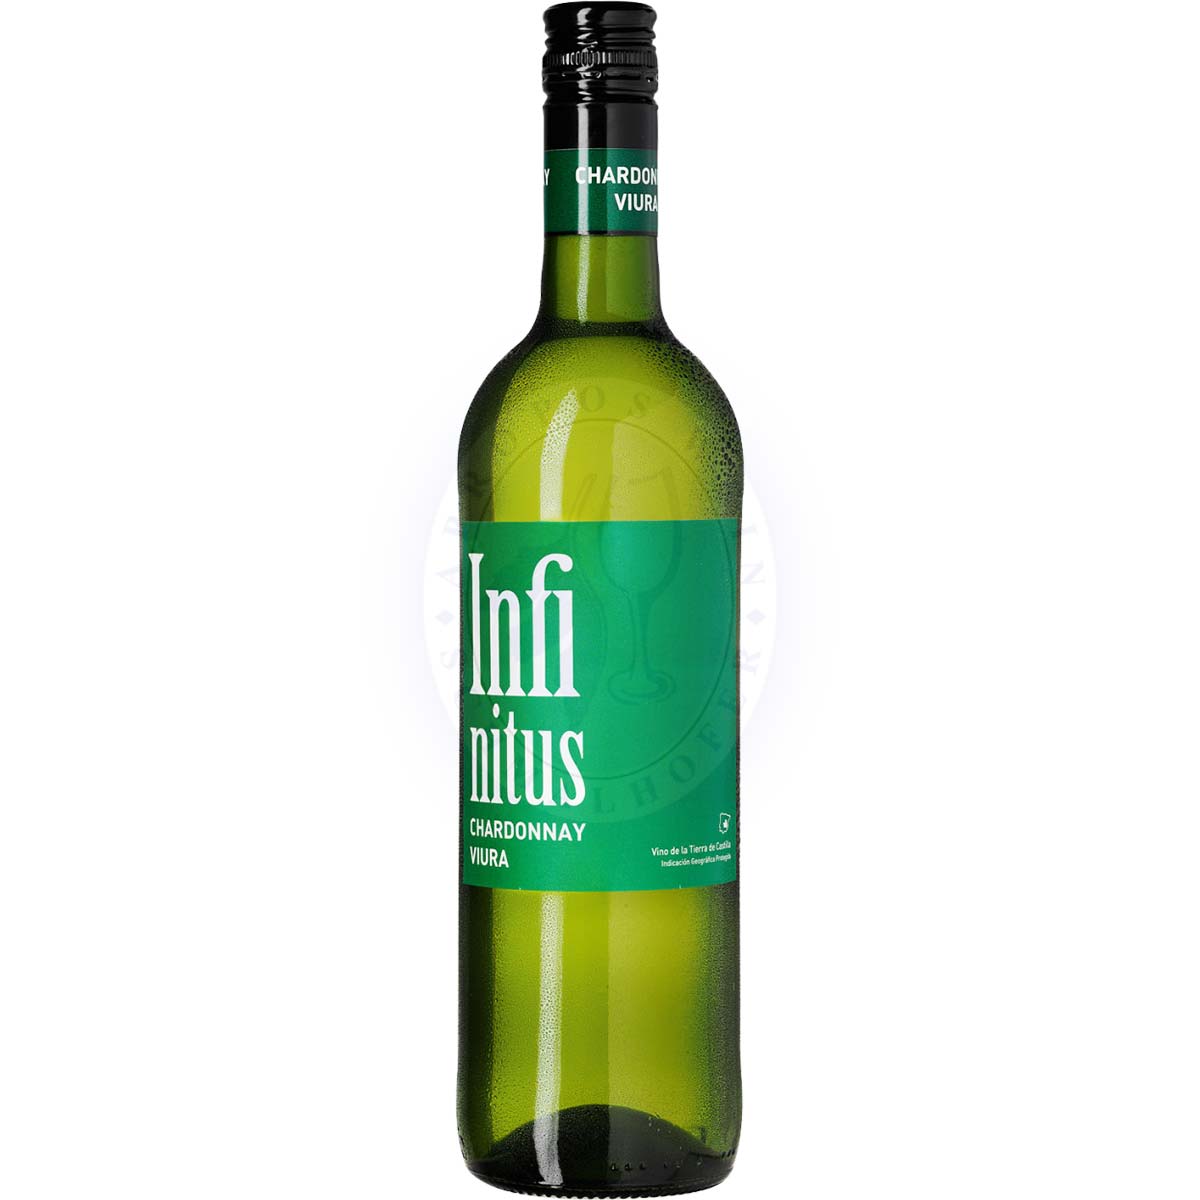 wein.plus find+buy: The wines of | members our wein.plus find+buy